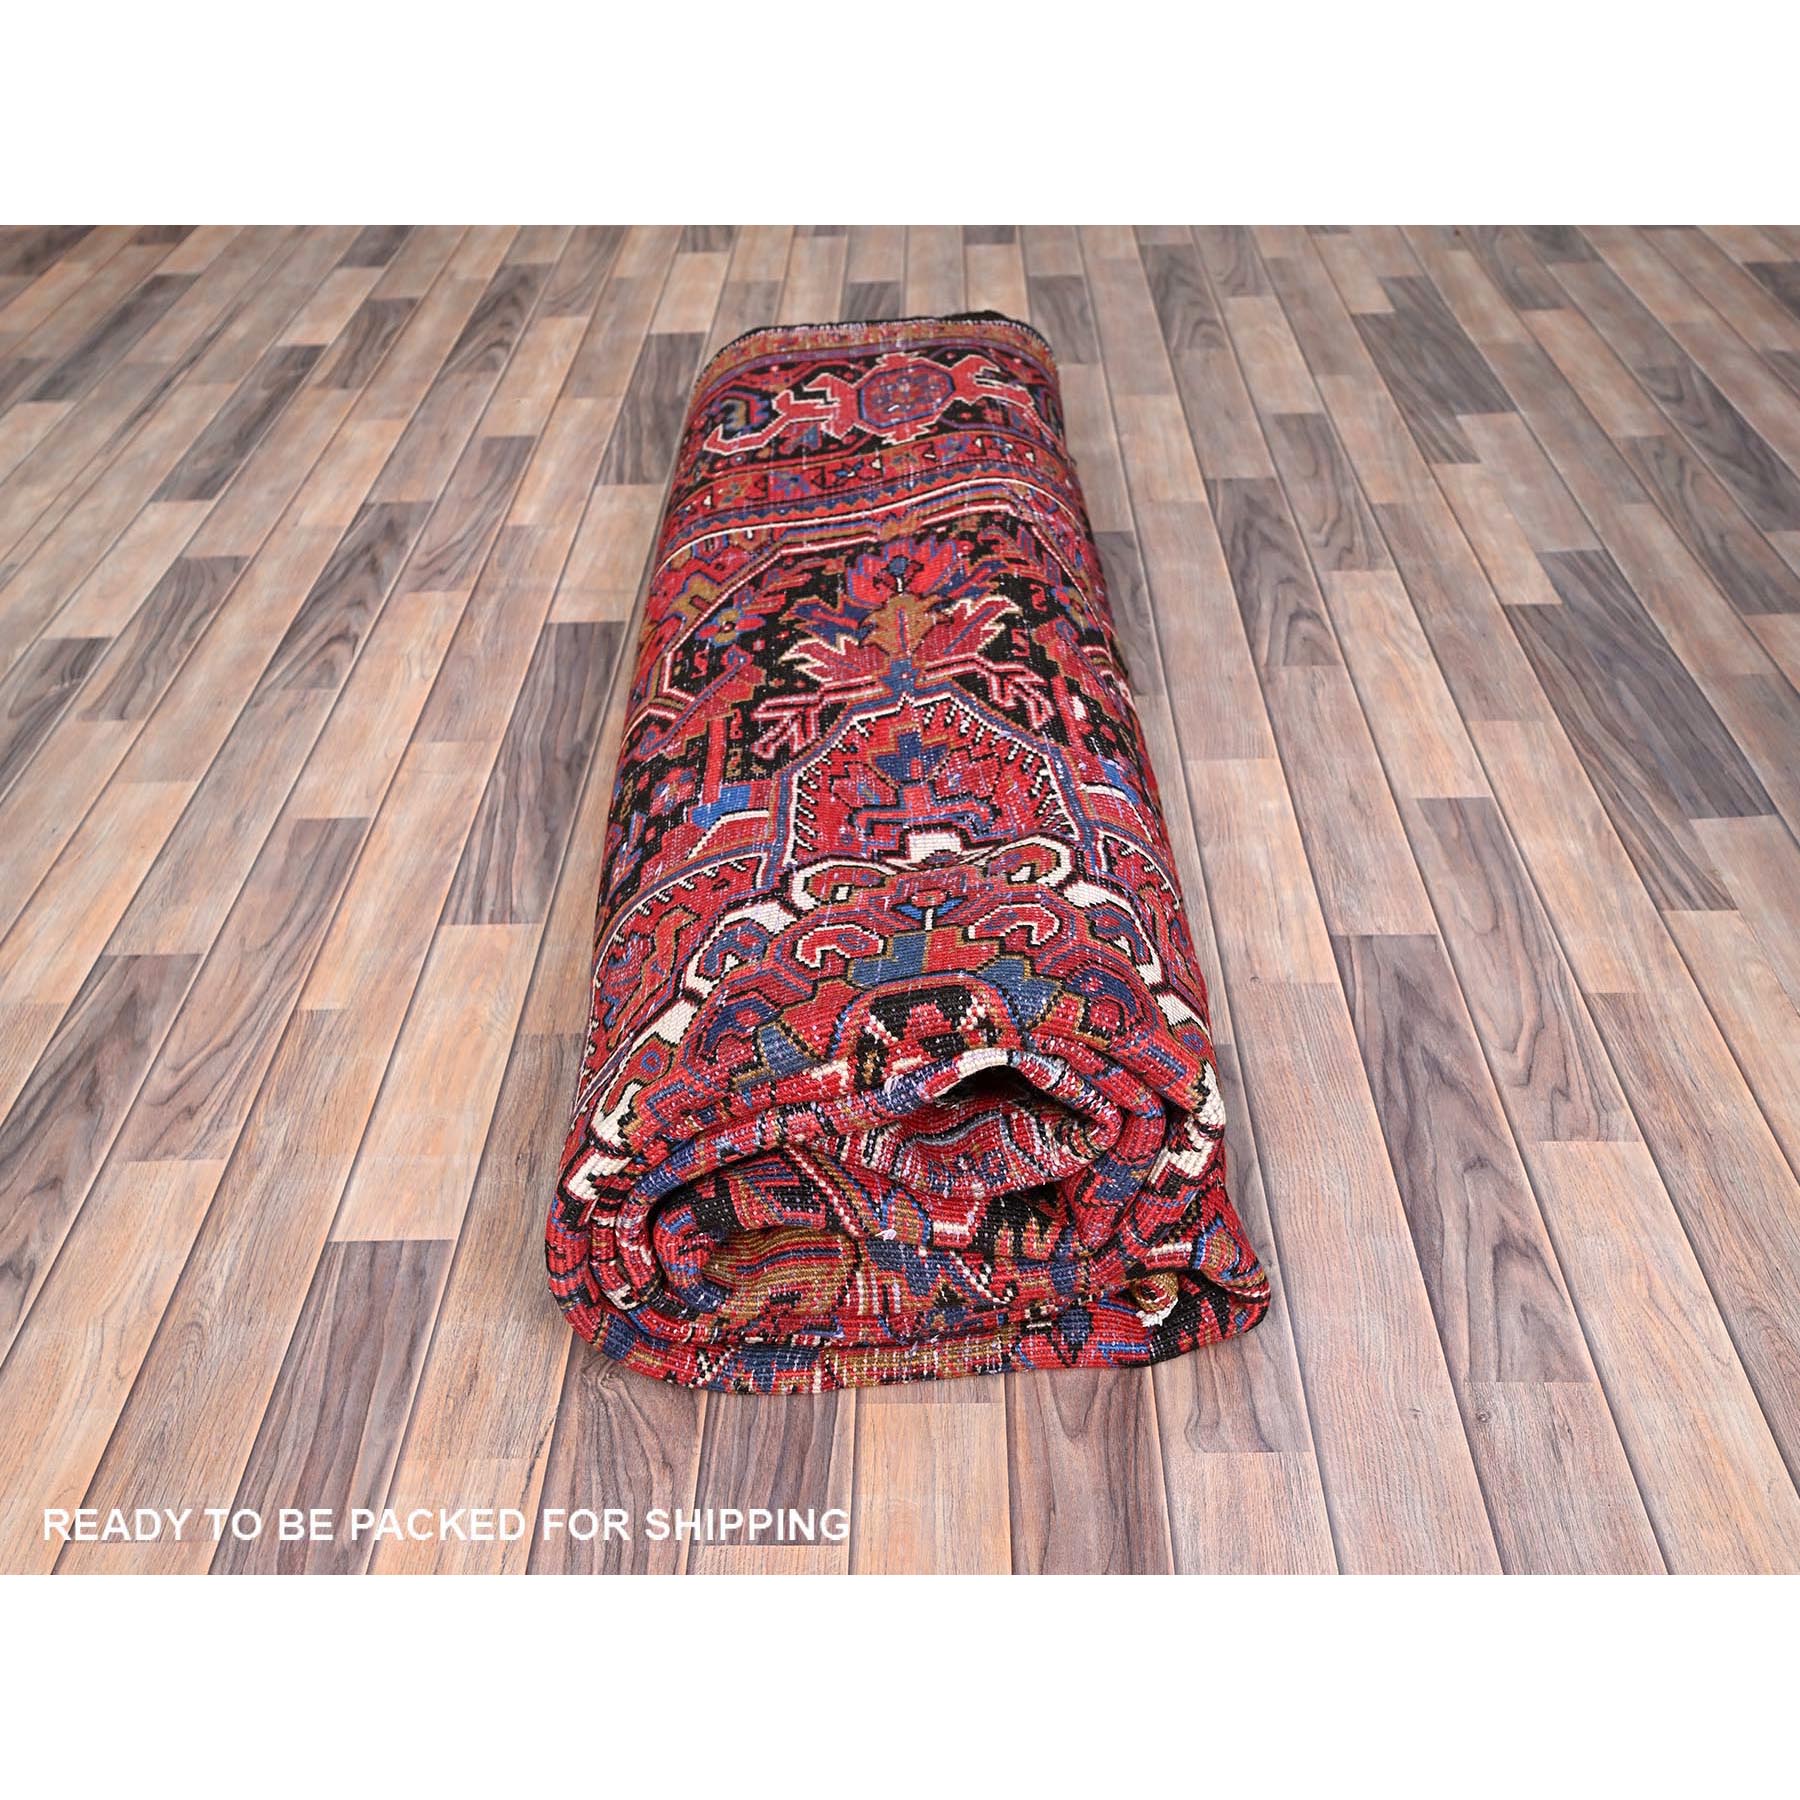 9'8"x13' Imperial Red, Pure Wool, Hand Woven, Semi Antique Persian Heriz, Good Condition, Distressed Feel, Evenly Worn, Oriental Rug 